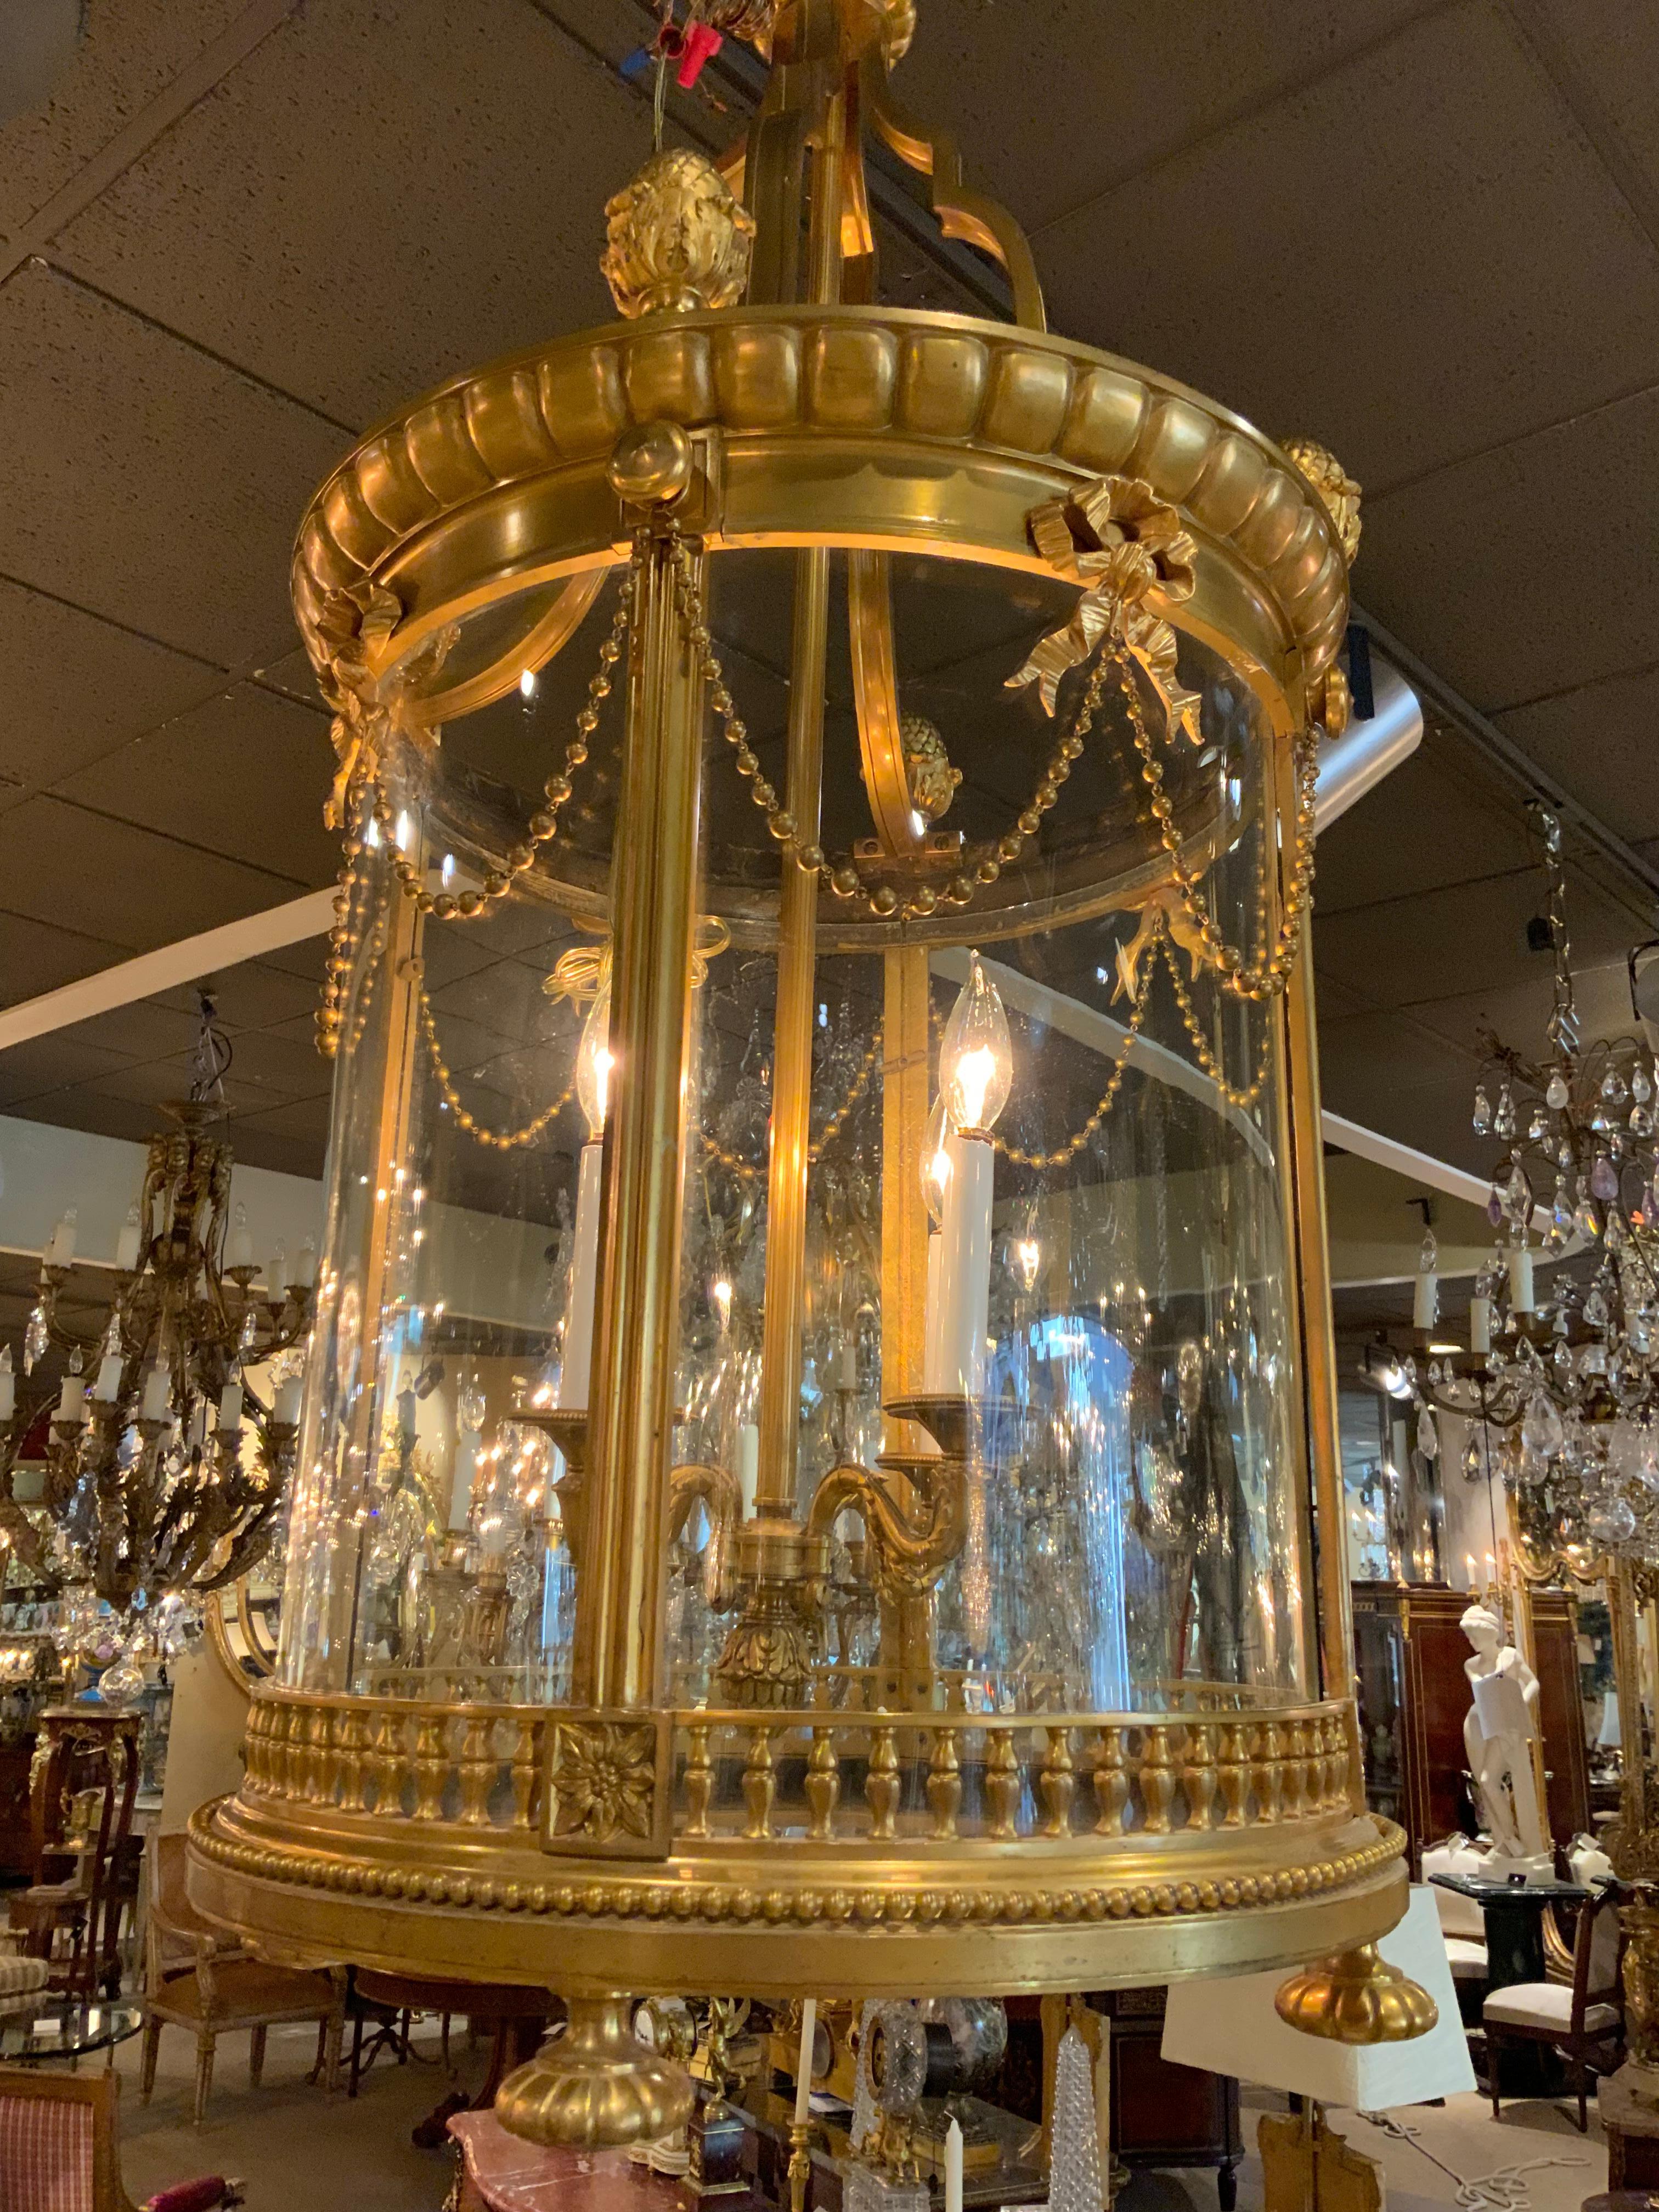 Large and exquisite lantern having 4 large cast acorn finials at the crest.
Four lights inside the glass surround. bows with connecting swags decorate 
The circumference.